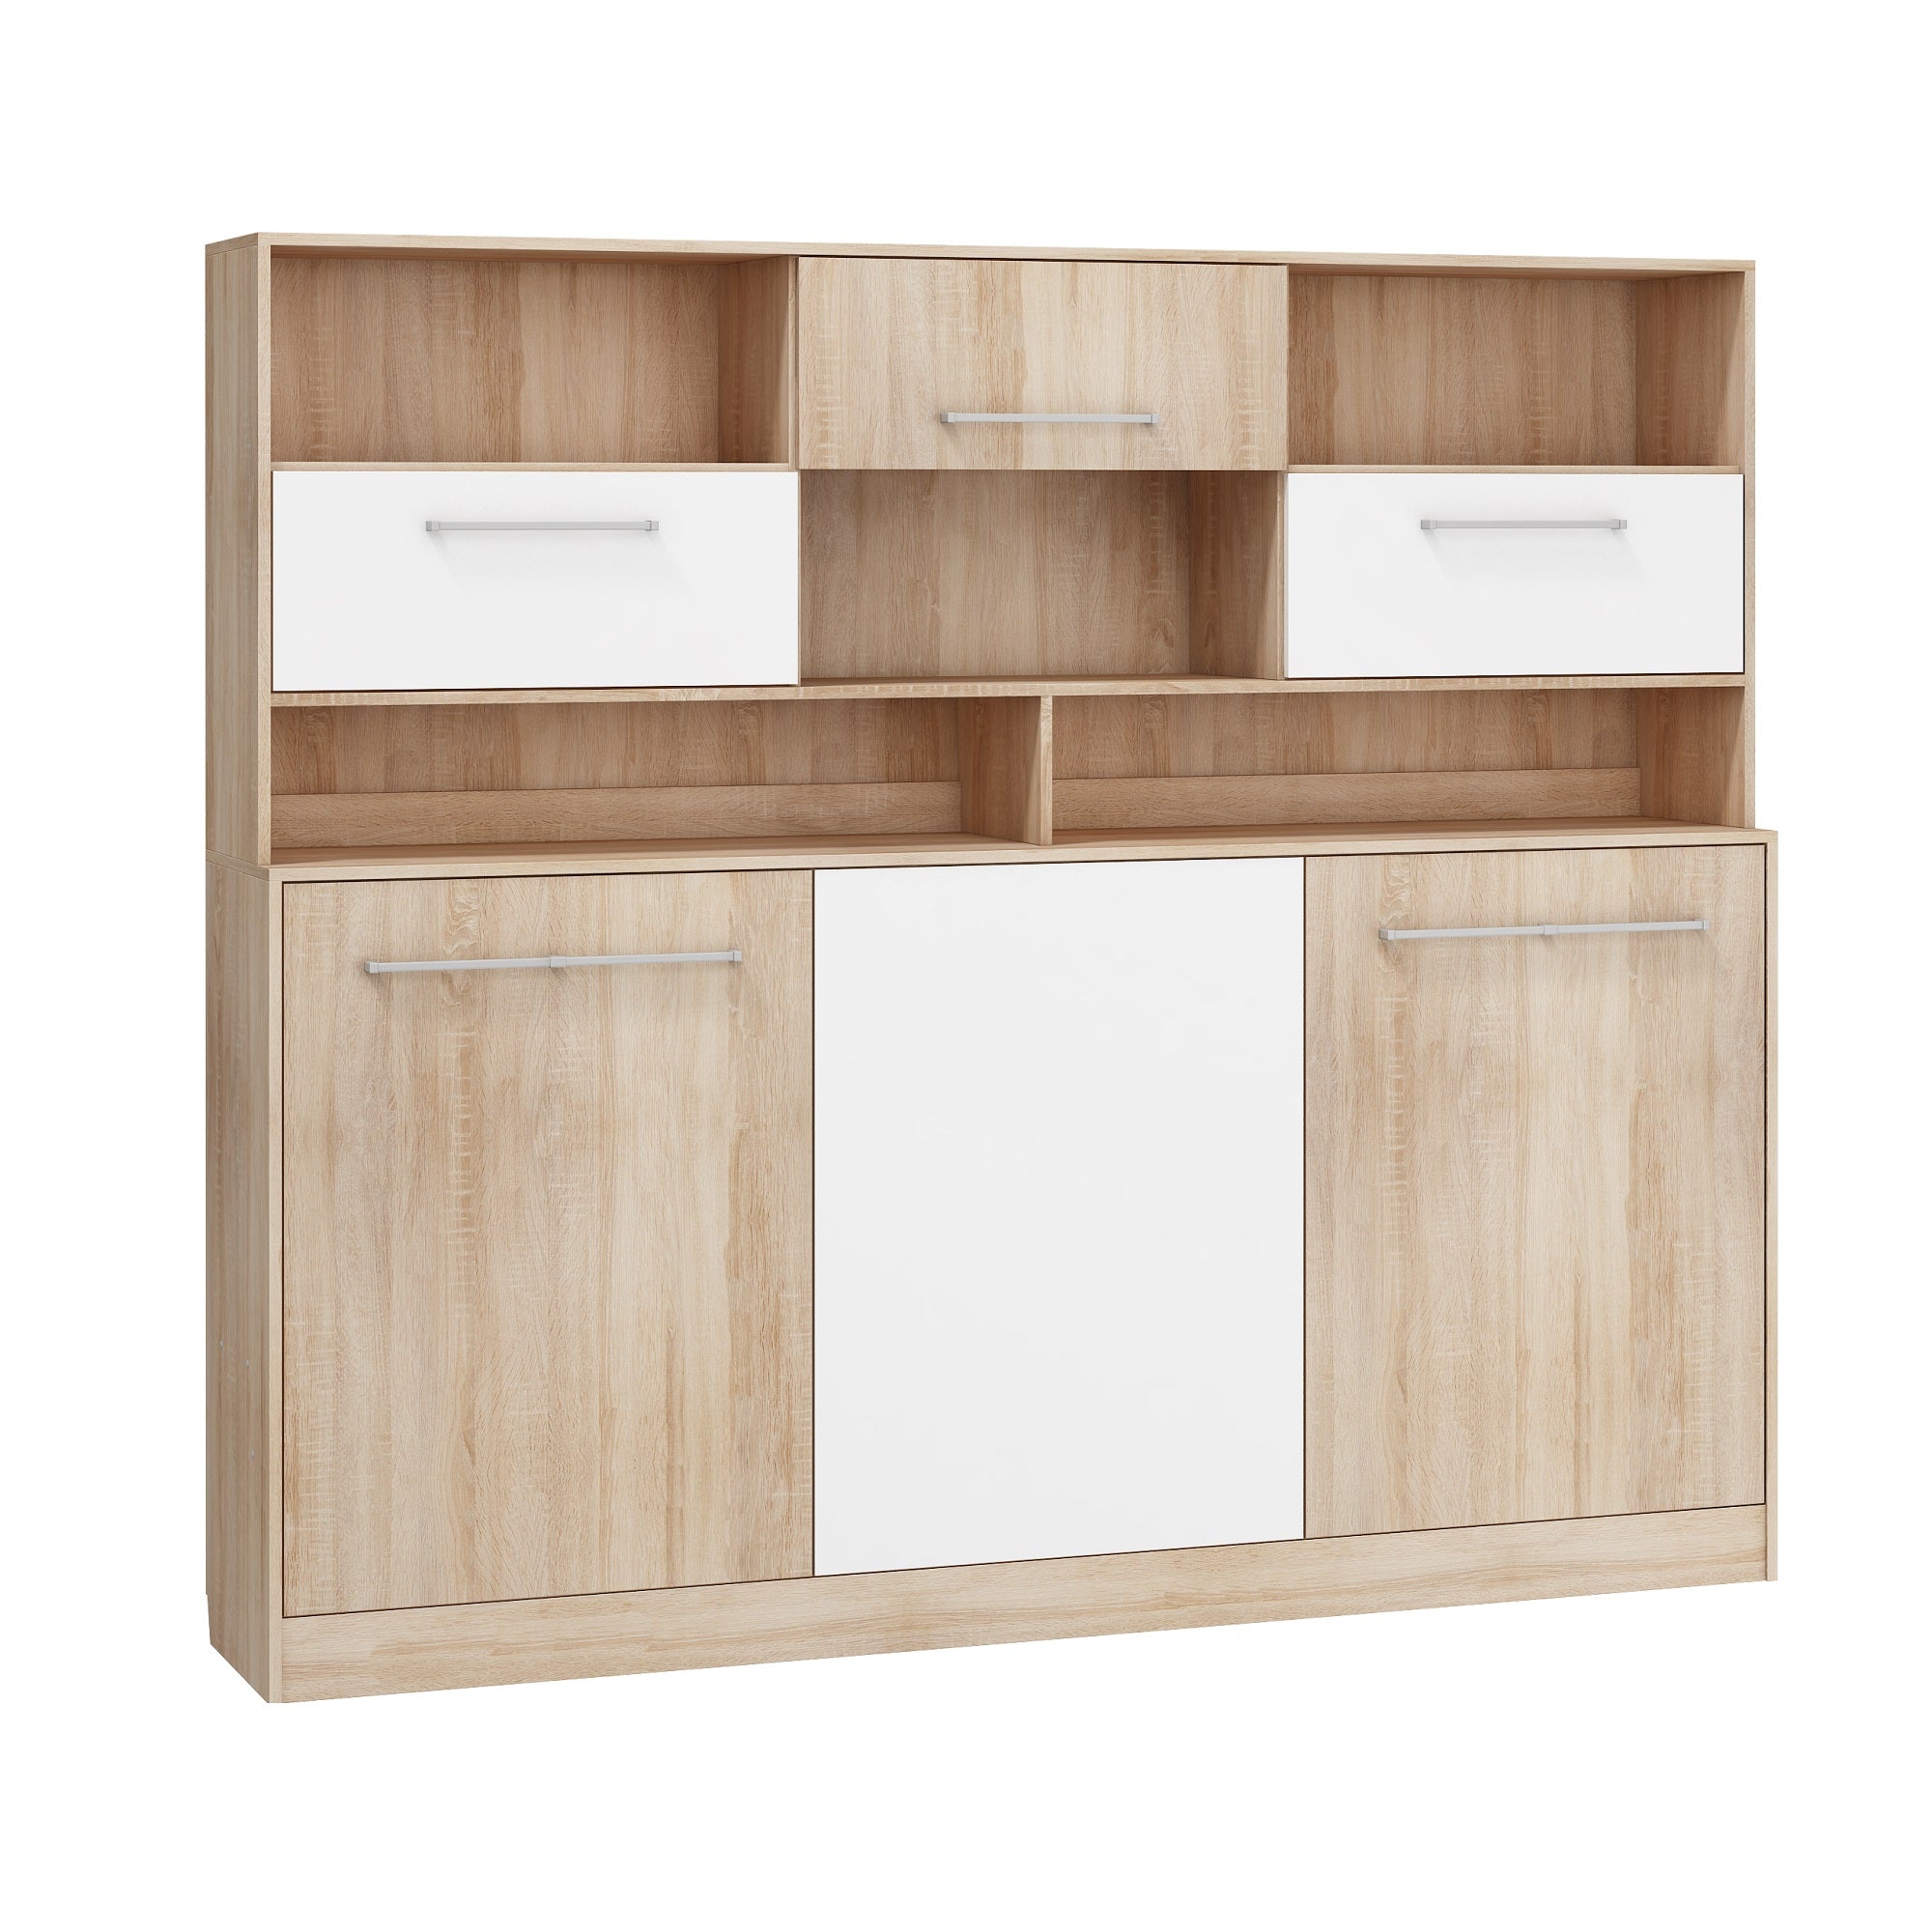 Roger European Single Kids Murphy Bed With Storage - Furniture.Agency